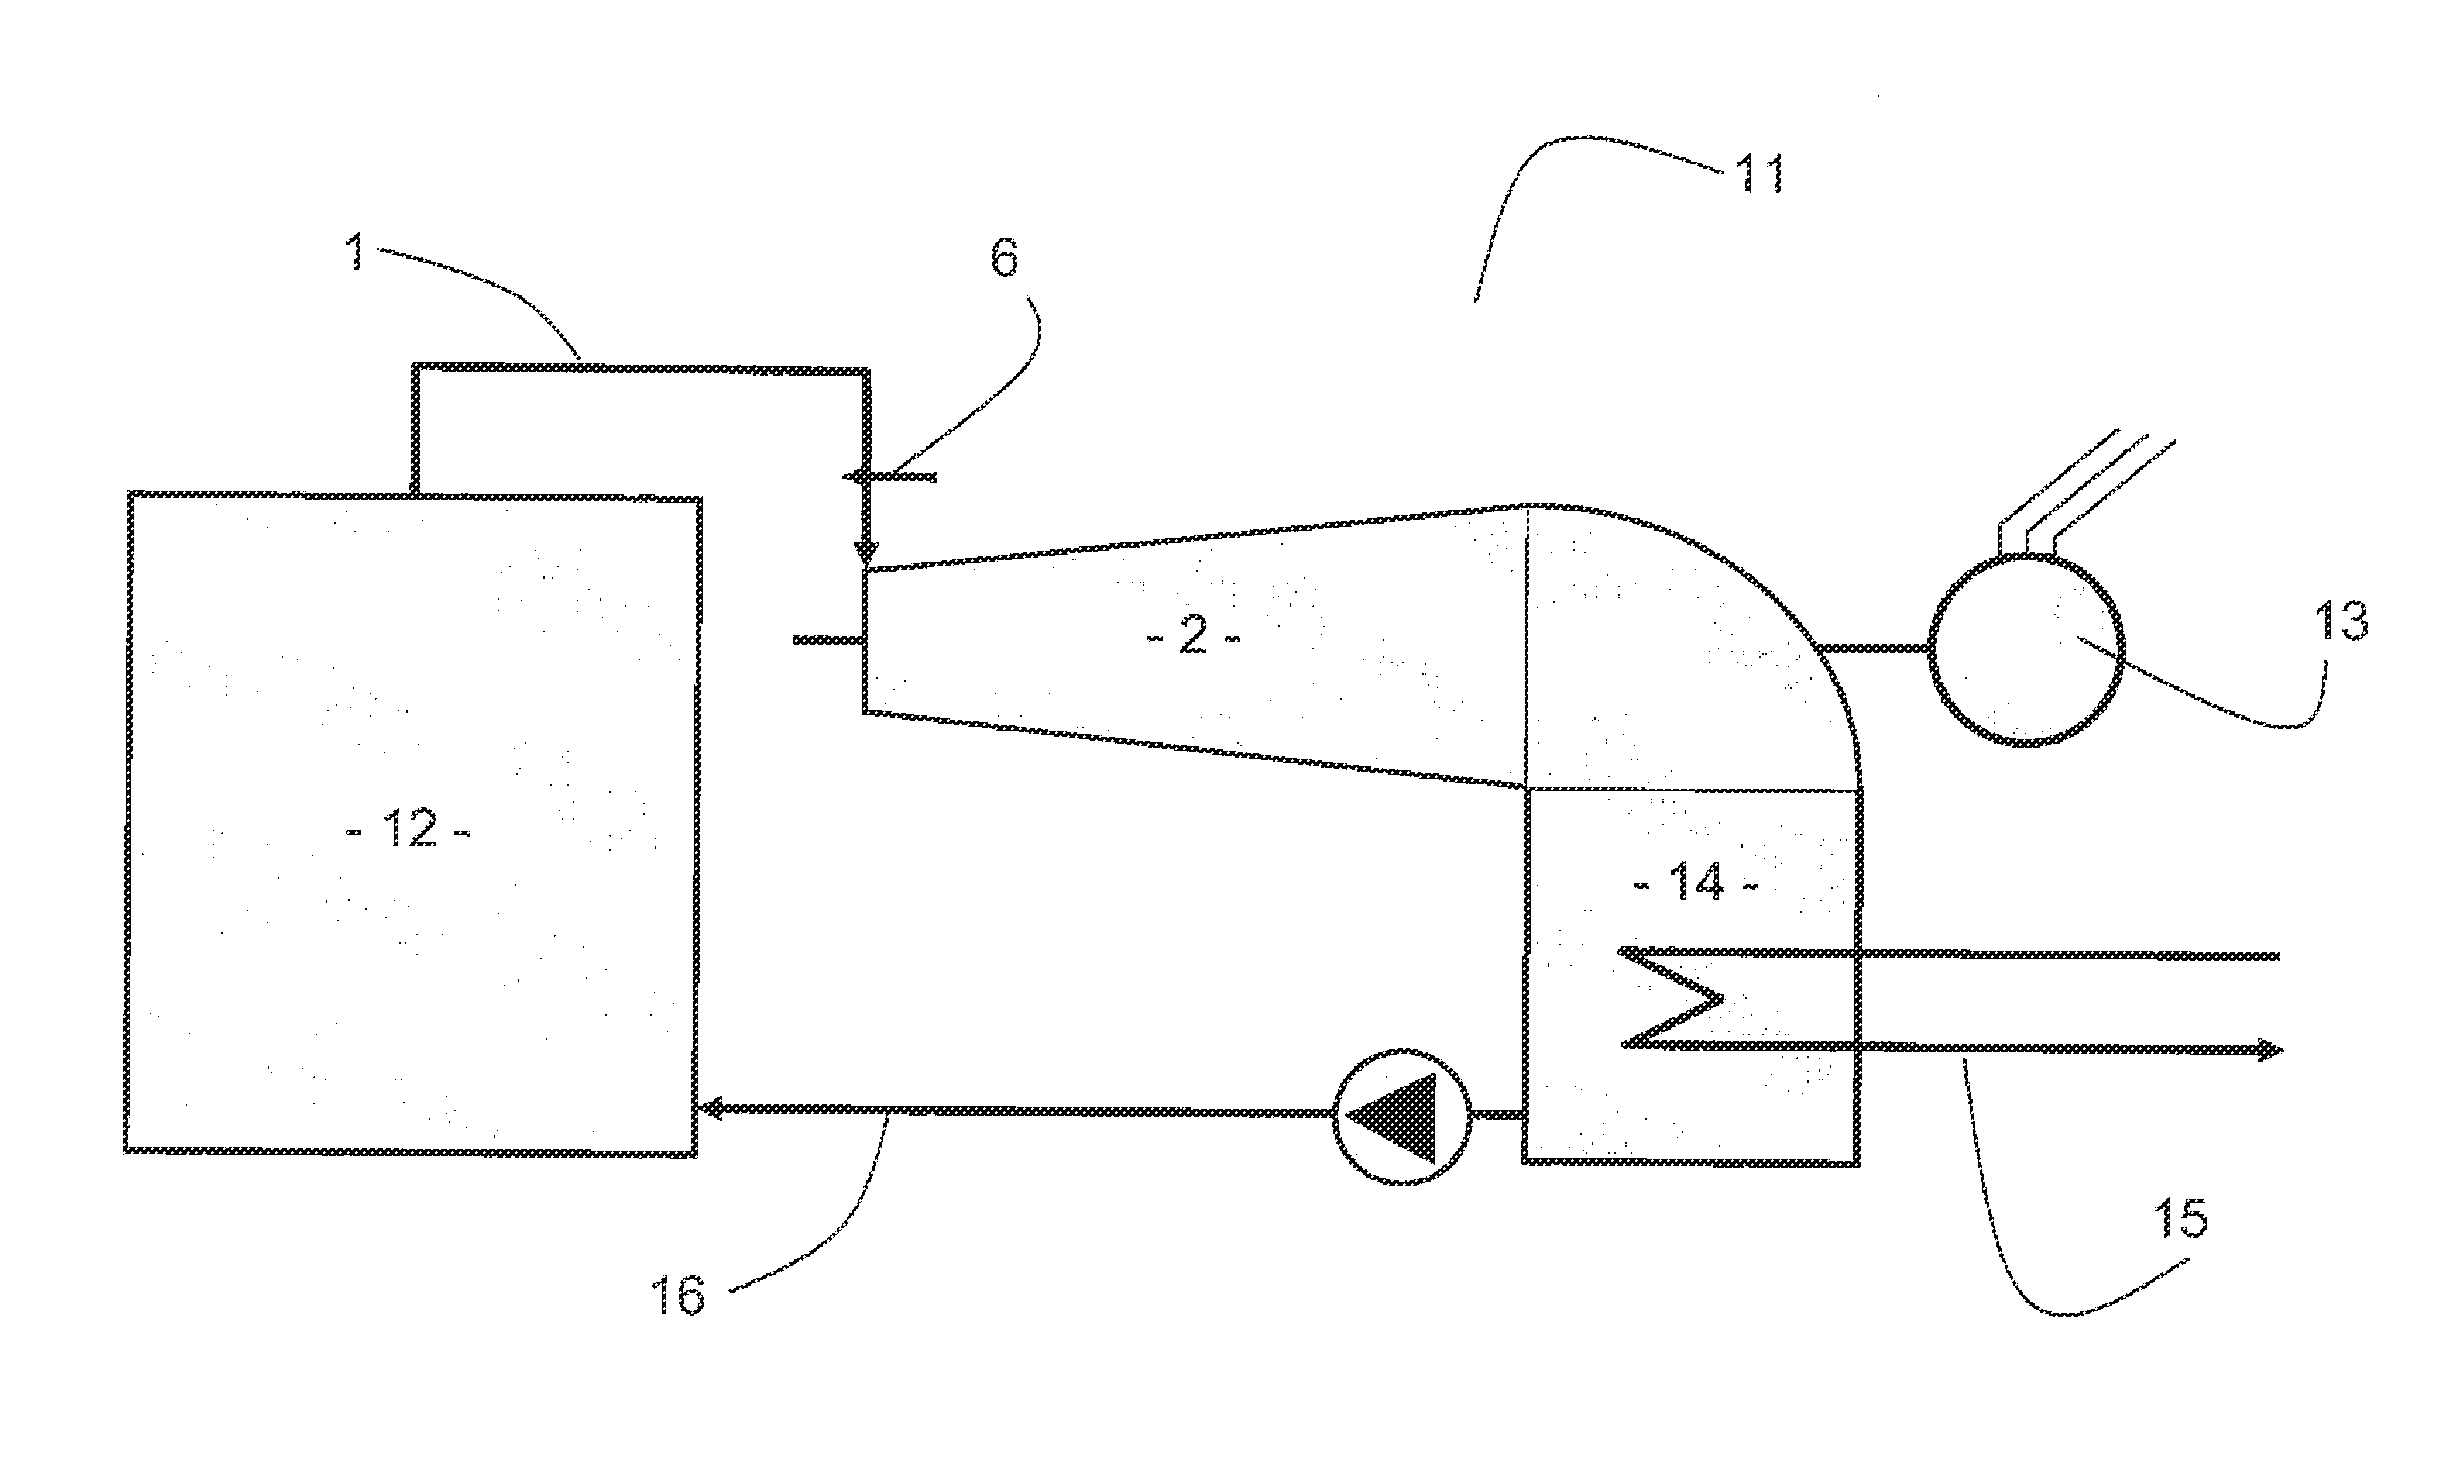 Steam supply circuit from a turbine